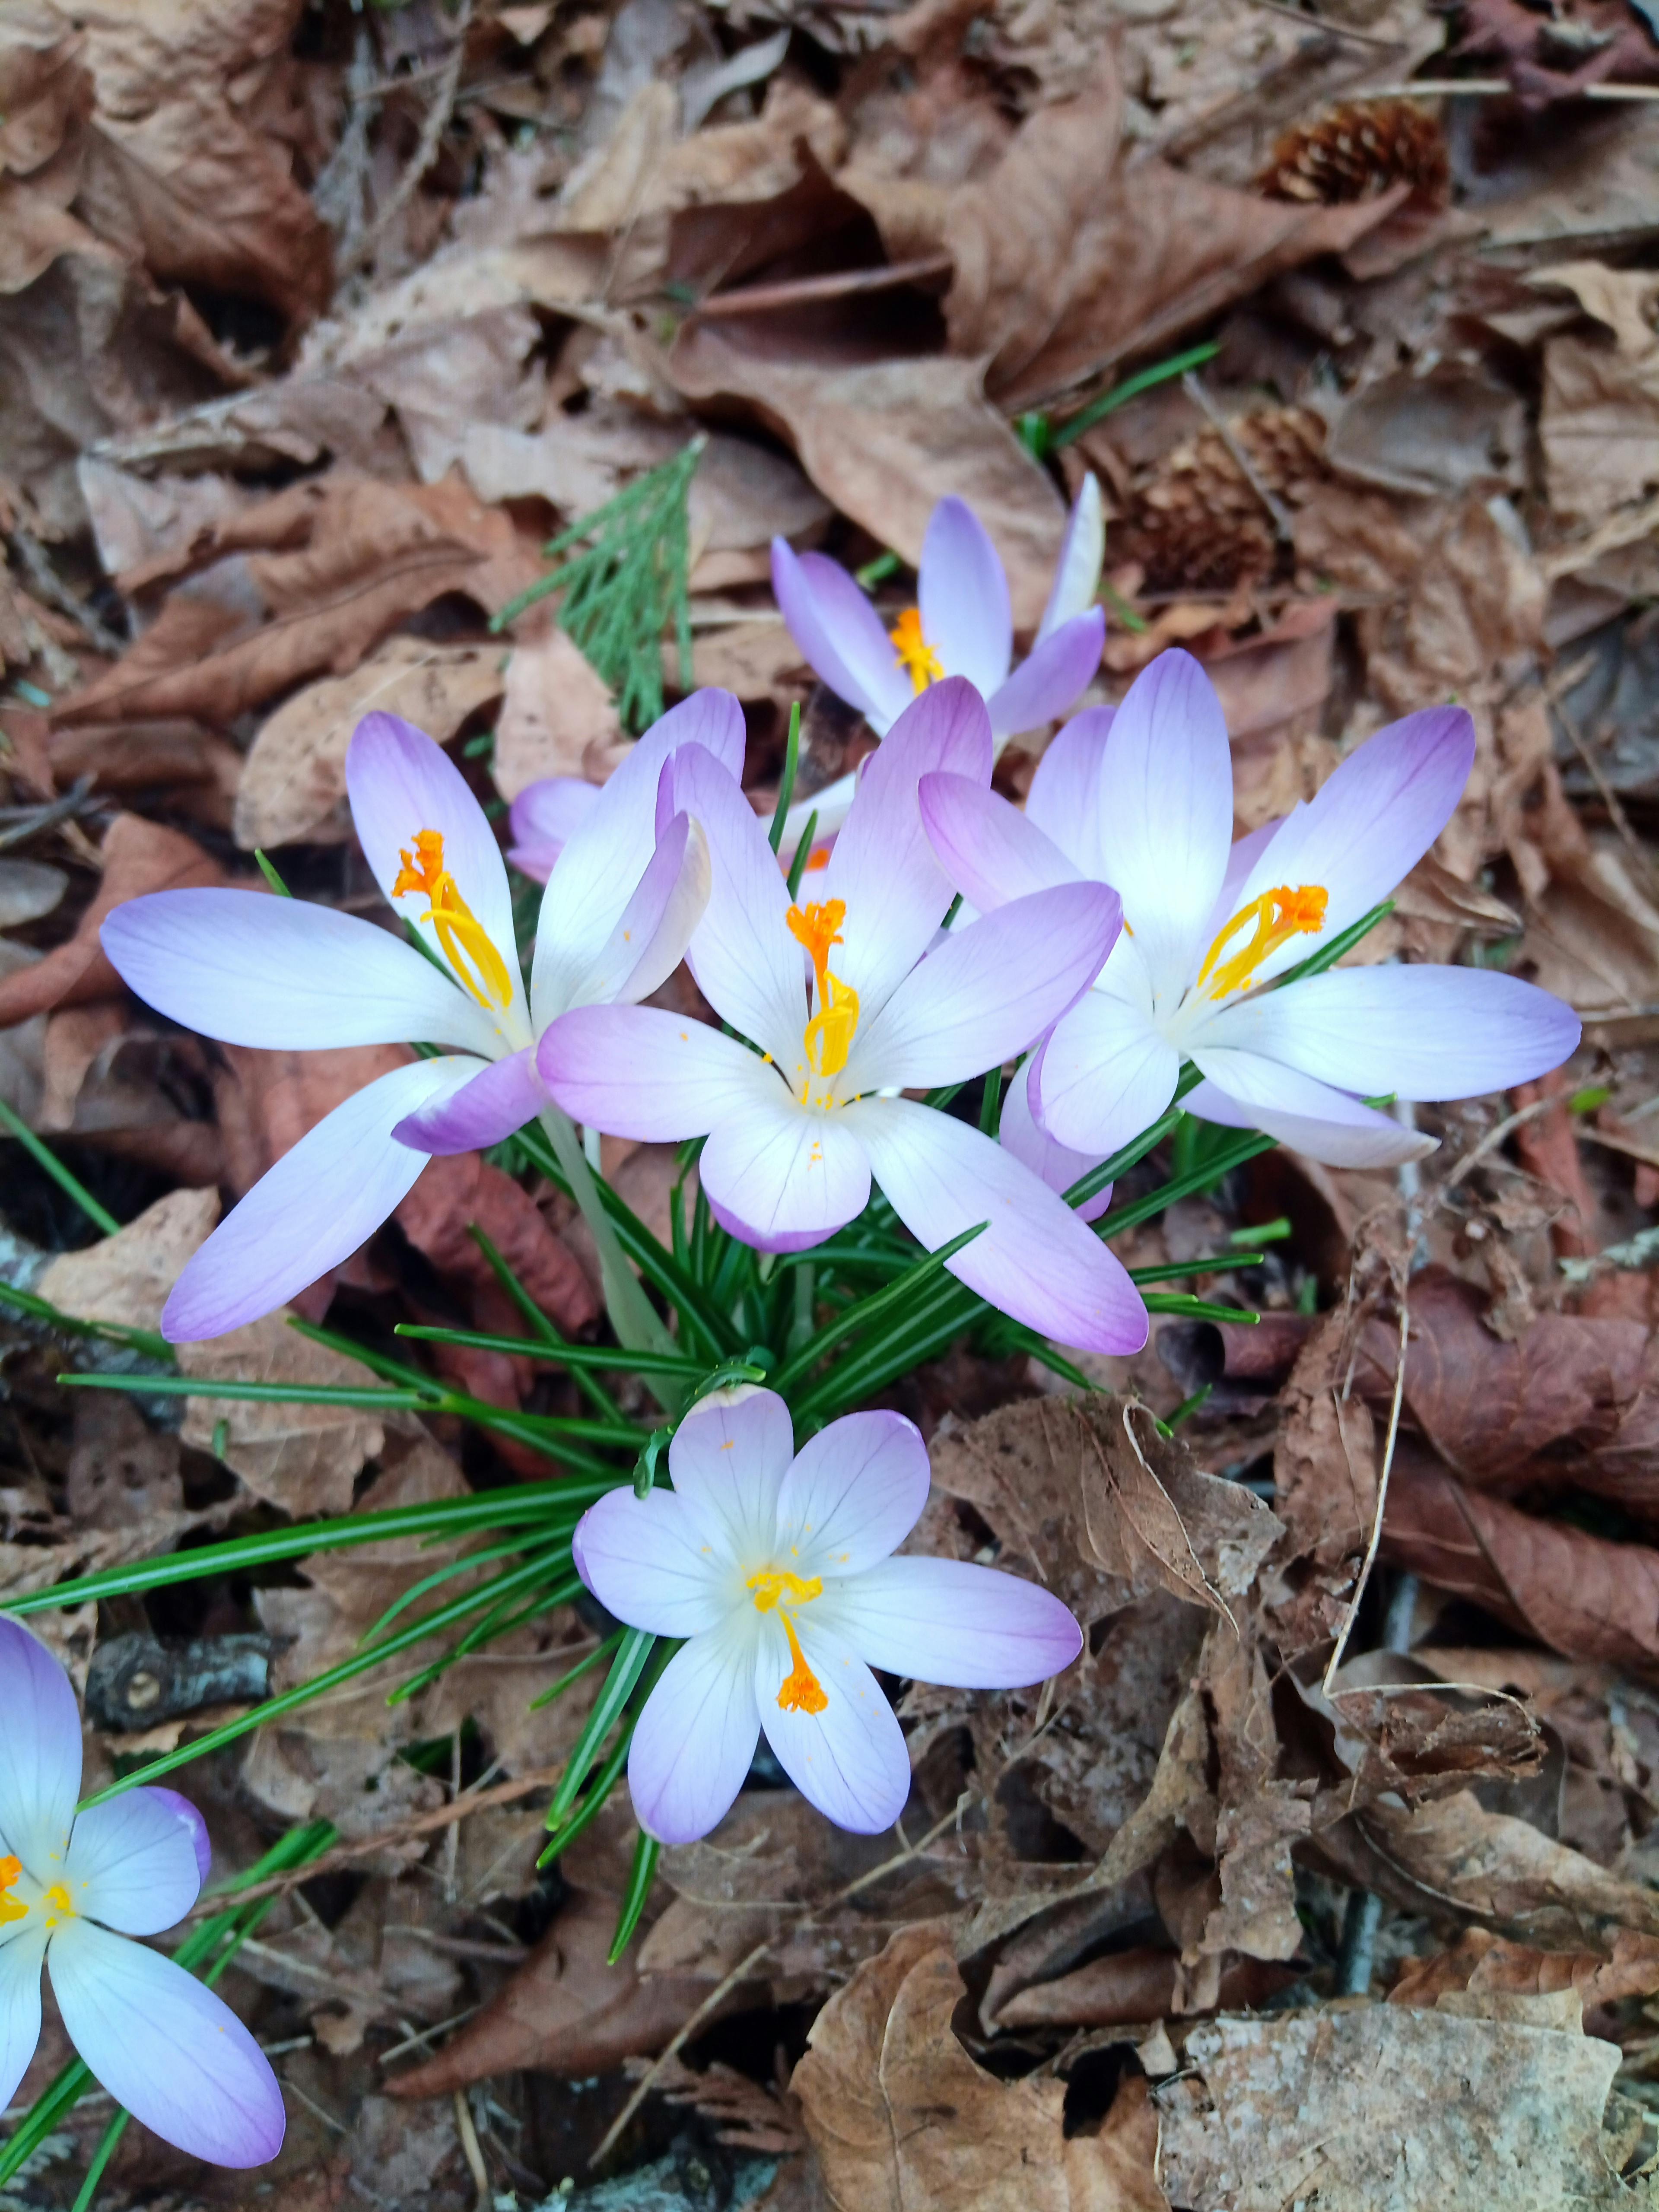 Crocus Blooming - First Sign of Spring